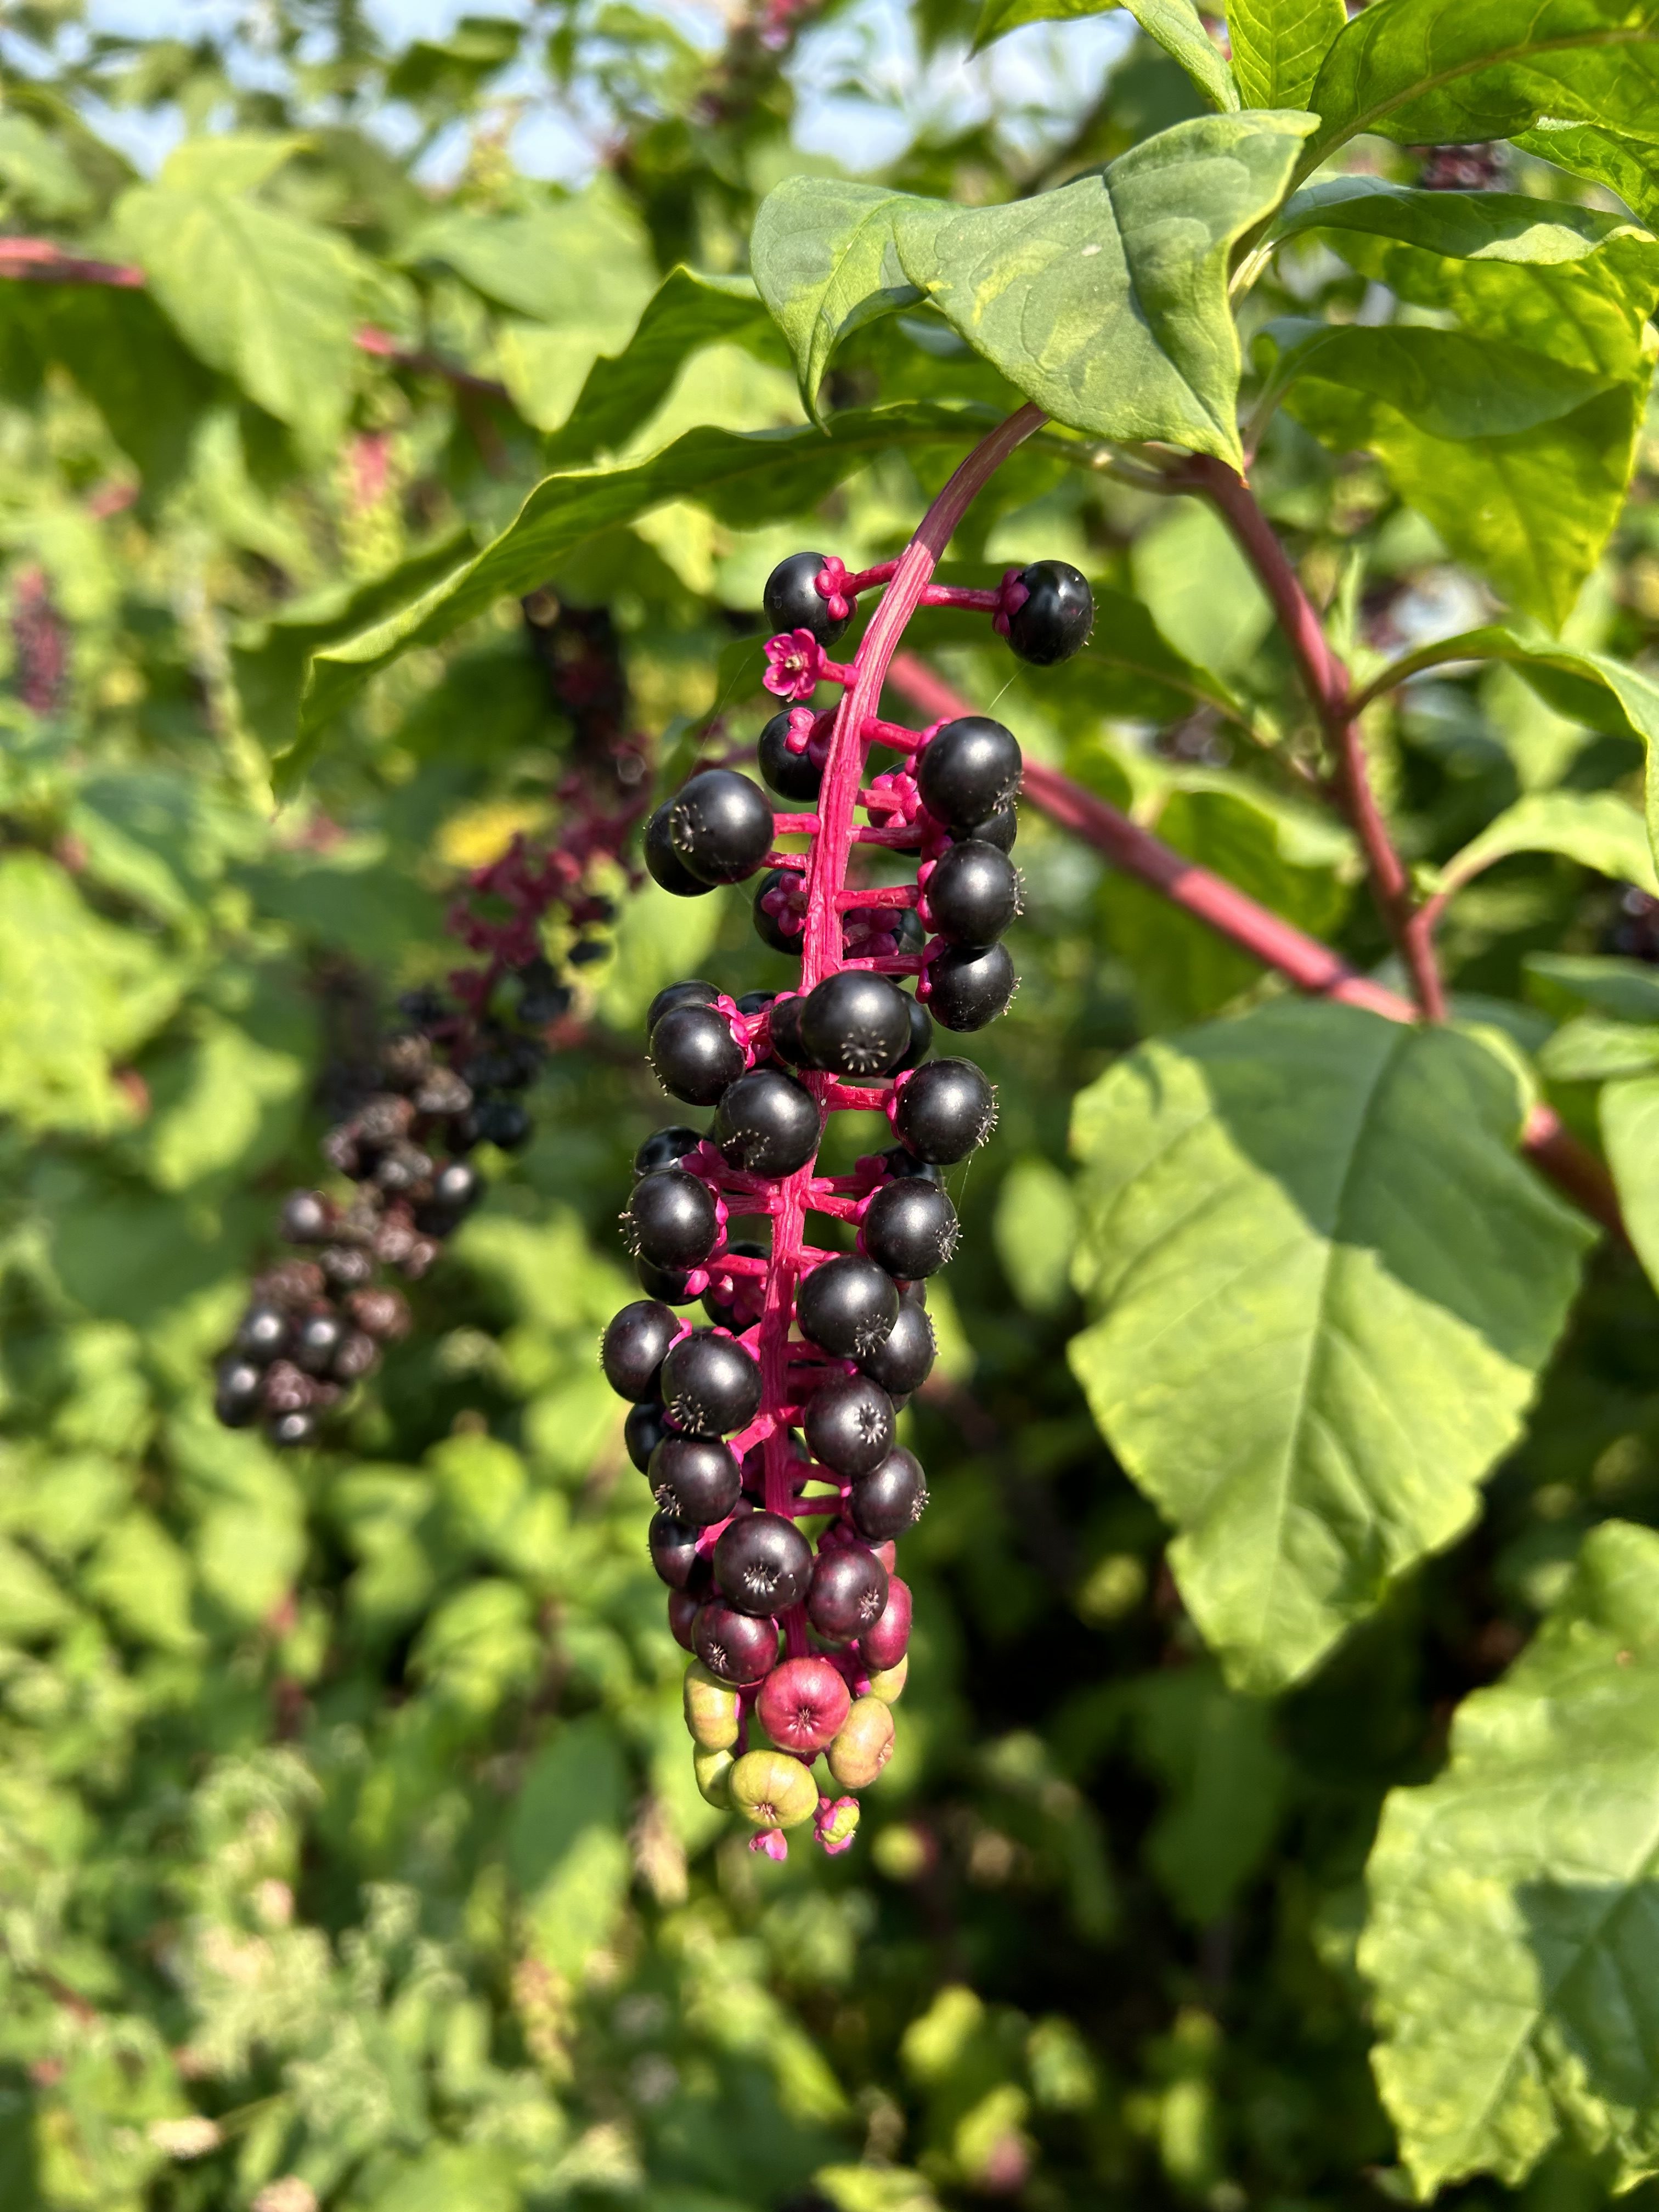 A photo of wild berries taken with the iPhone 14.